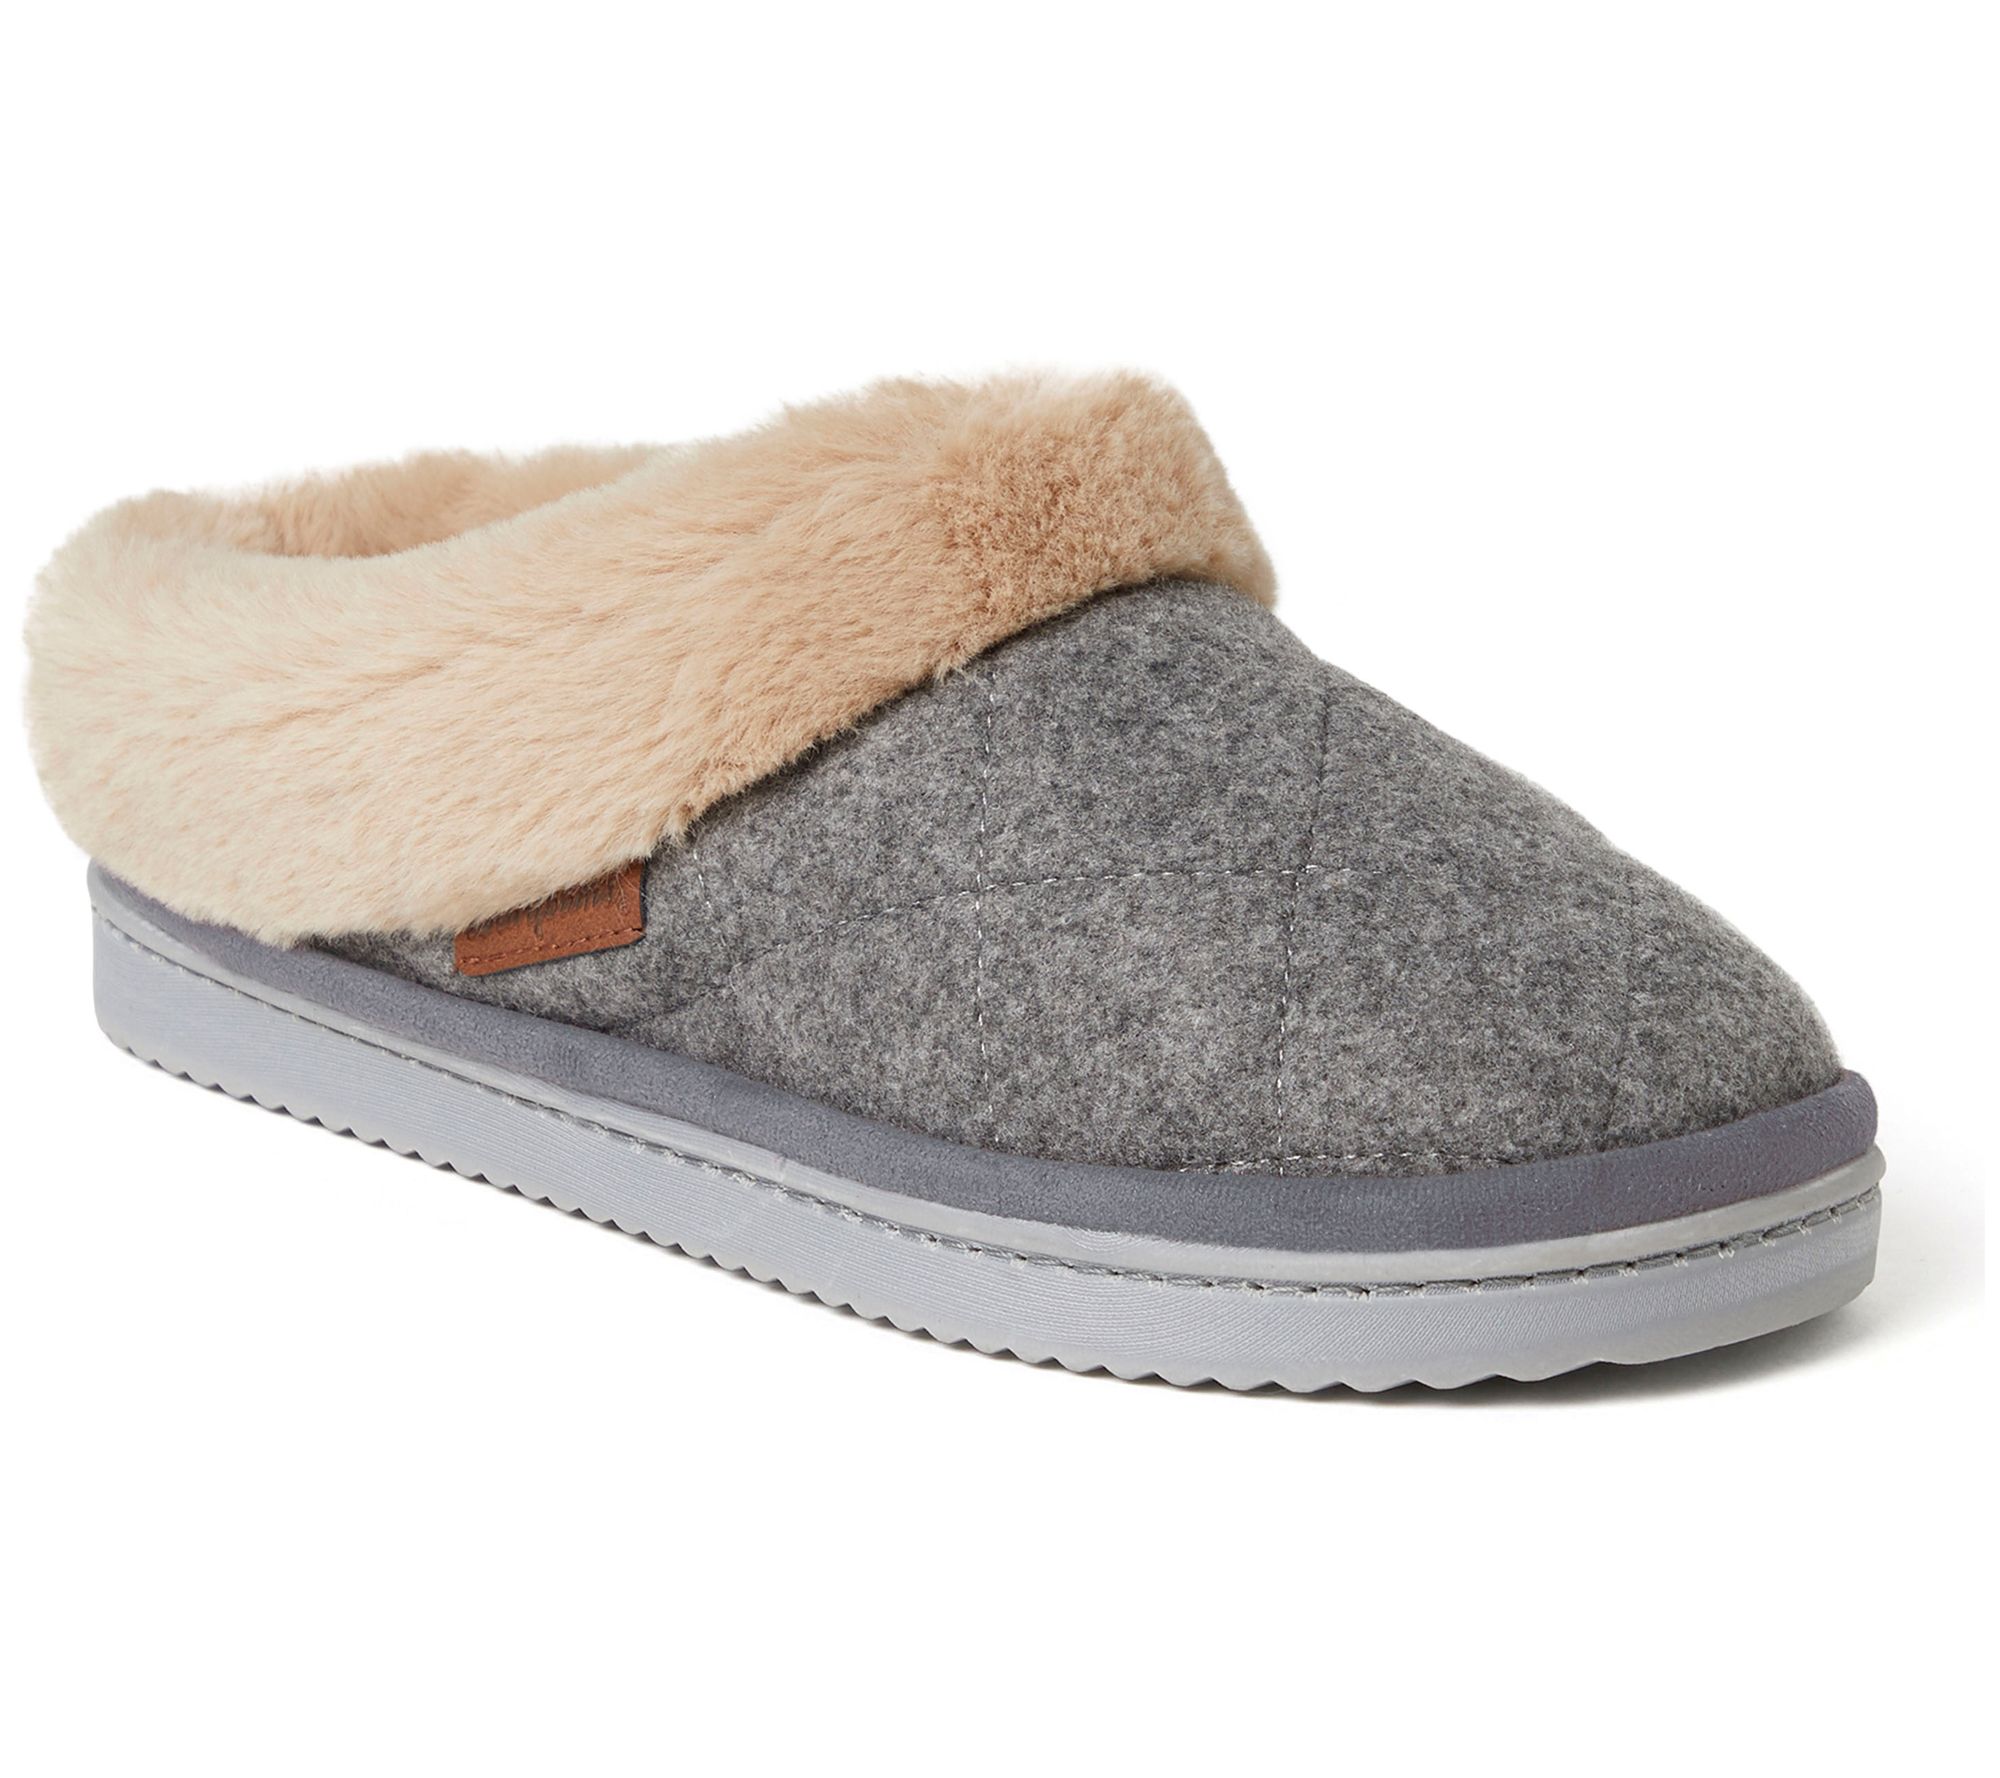 Dearfoams Quilted Microwool Clog Slippers - Cora - QVC.com